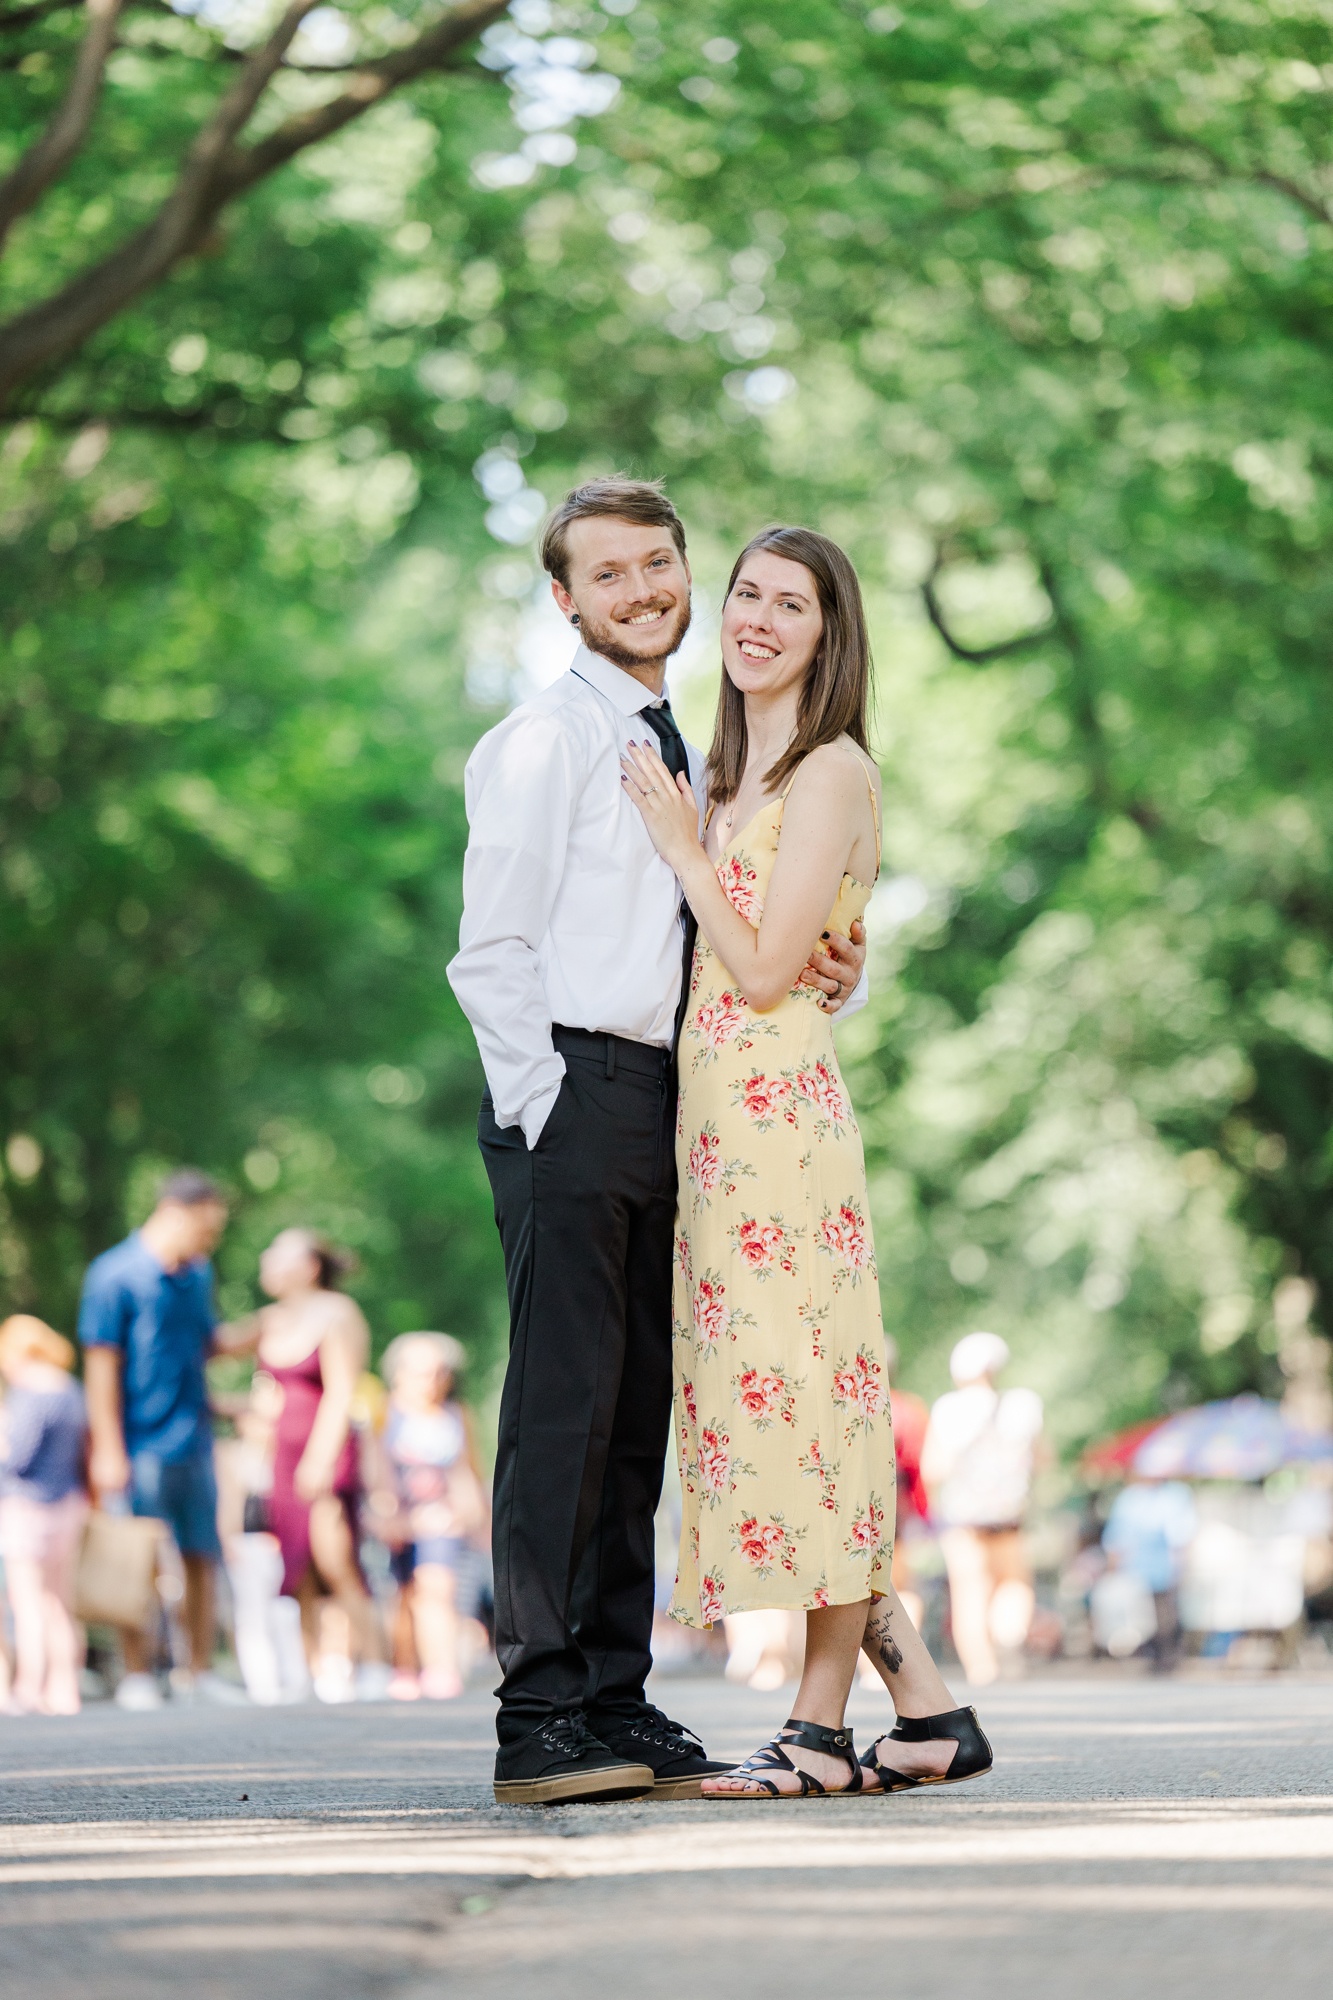 Fabulous Central Park Elopement in the Summertime